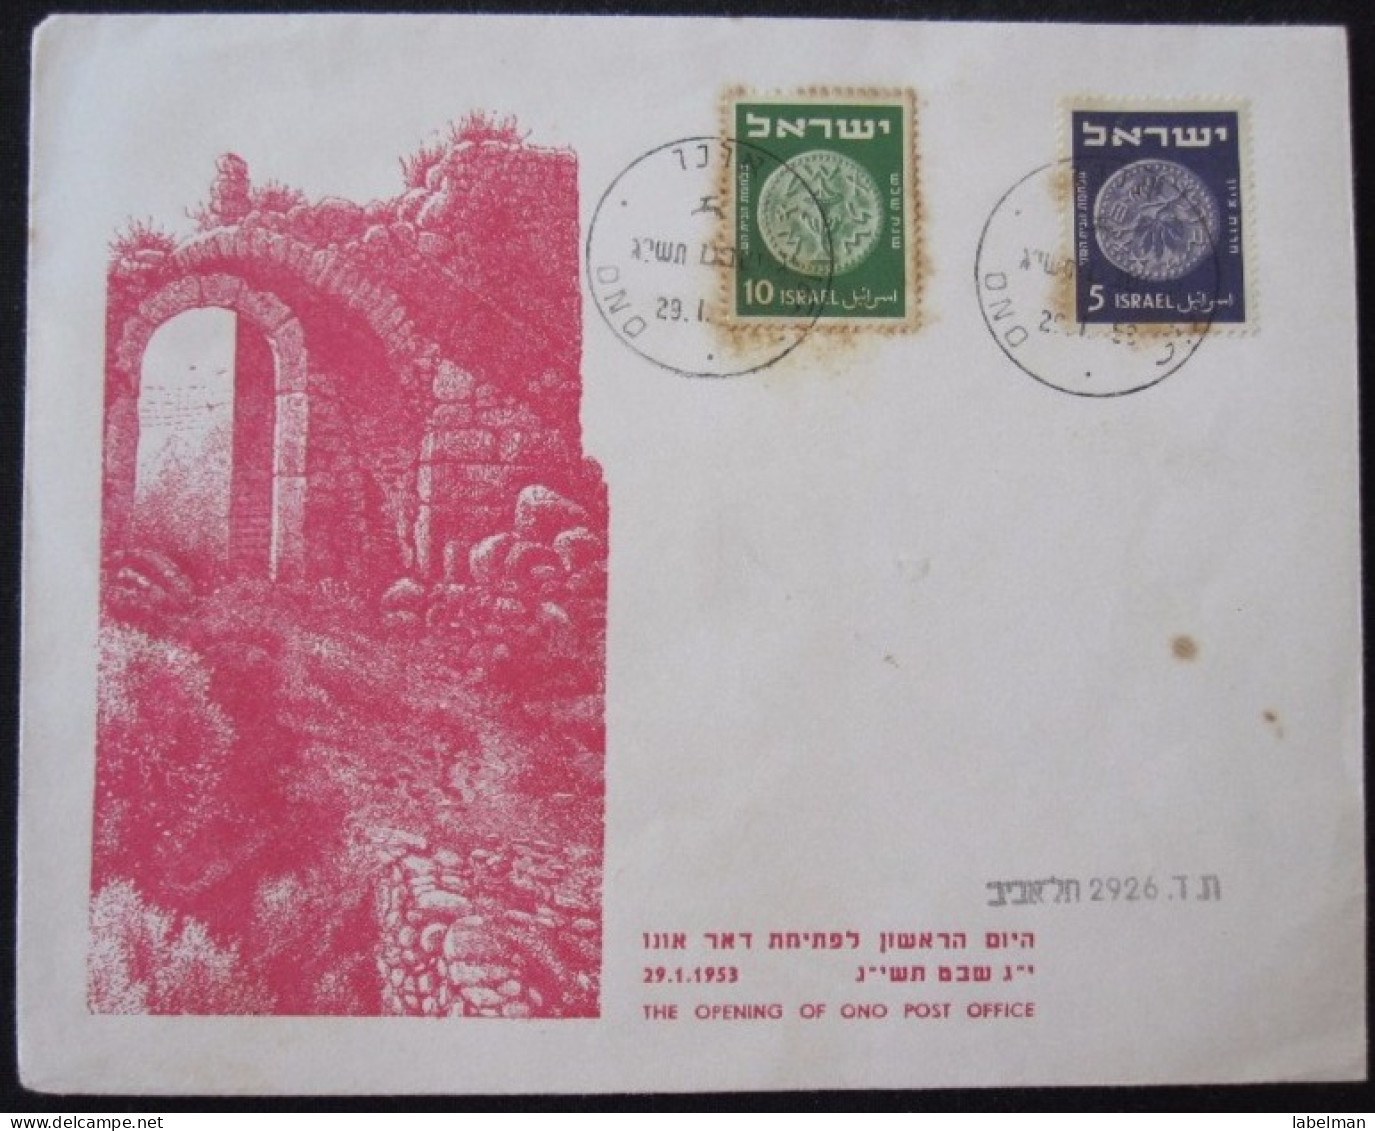 1953 KIRIYAT ONO KHAN CENTRE POO FIRST DAY POST OFFICE OPENING AIR MAIL STAMP ENVELOPE ISRAEL JUDAICA JERUSALEM - Covers & Documents